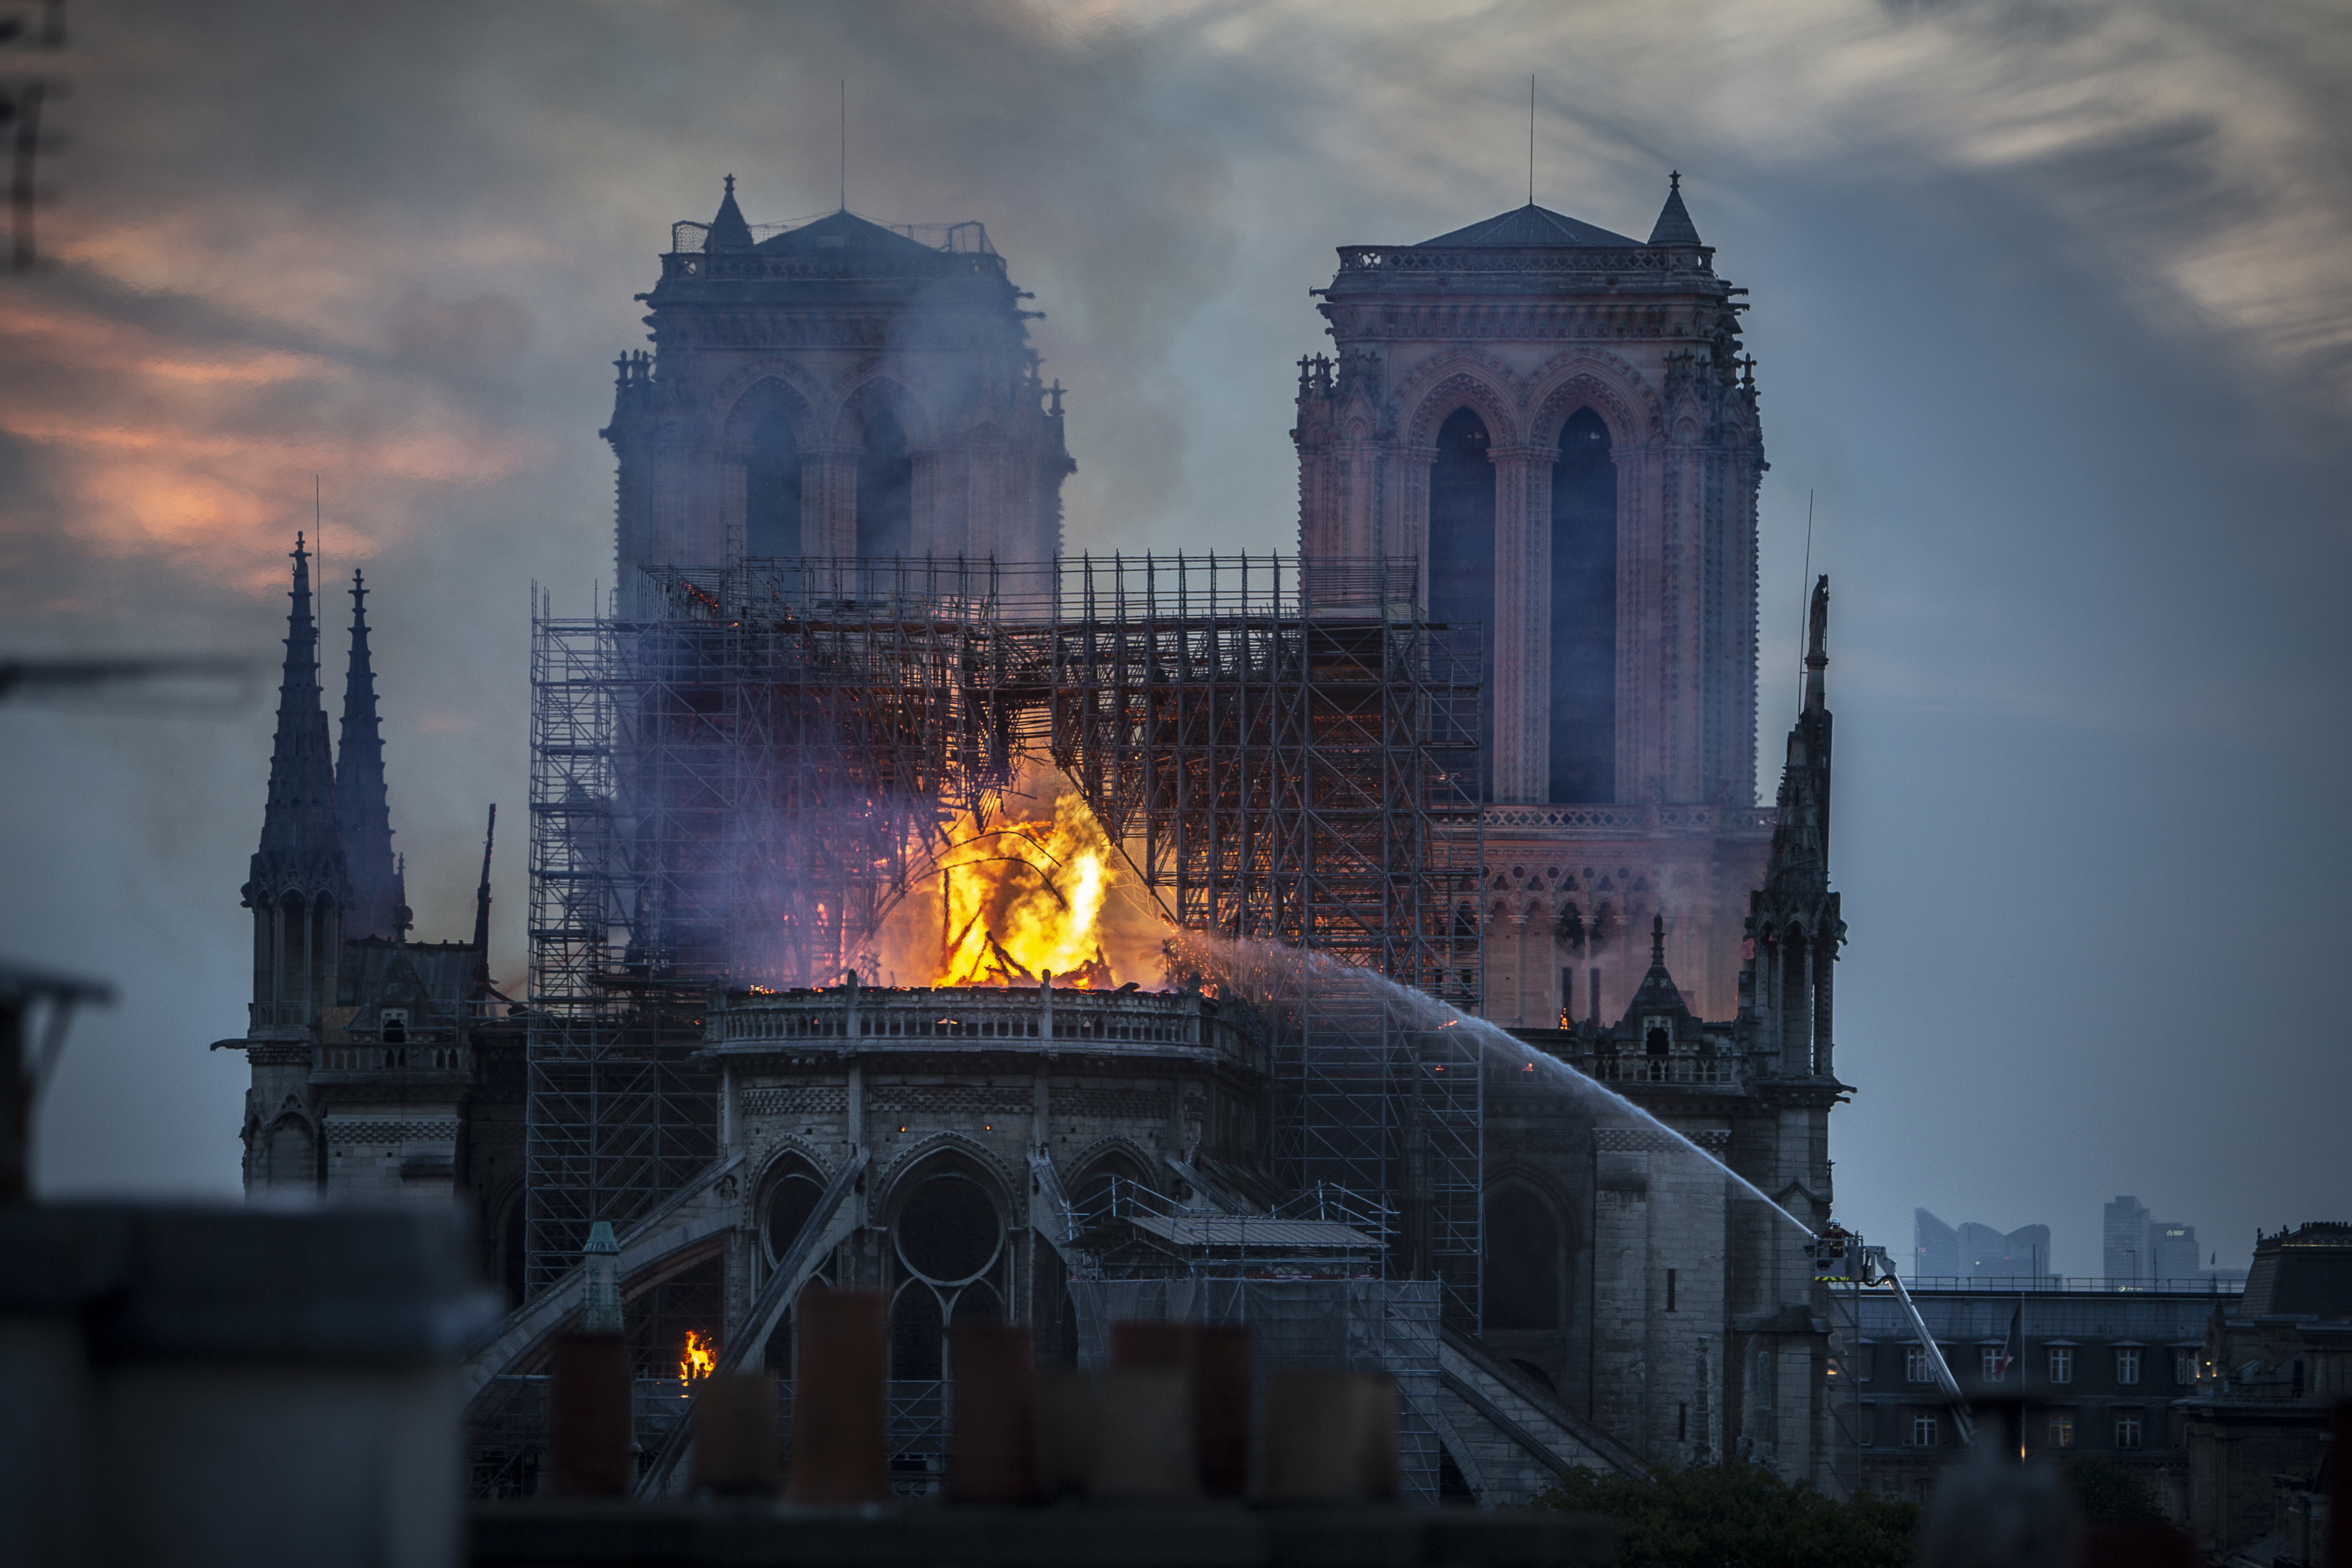 The Notre Dame Cathedral in flames